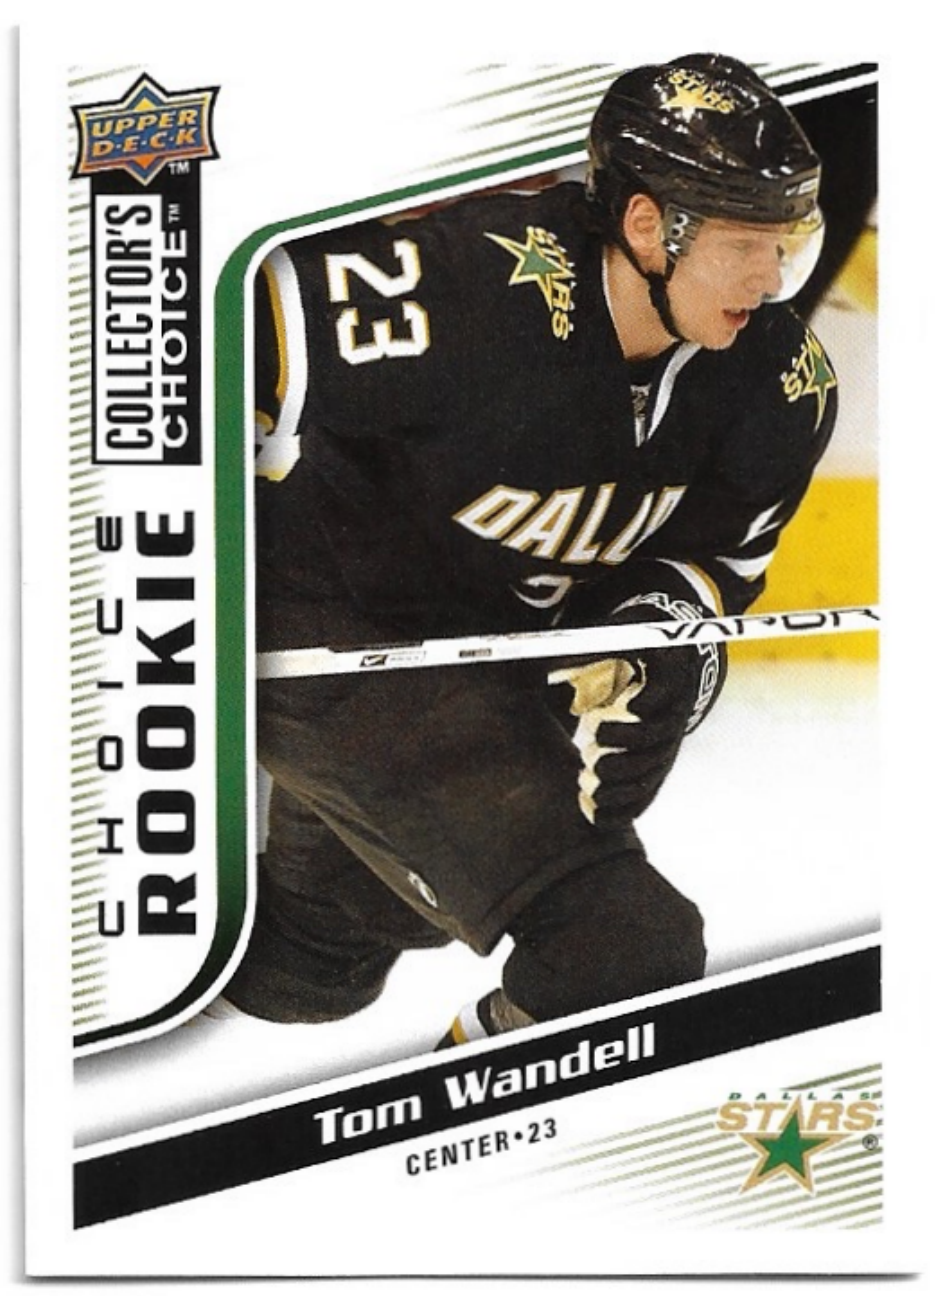 Choice Rookie TOM WANDELL 09-10 UD Collector's Choice